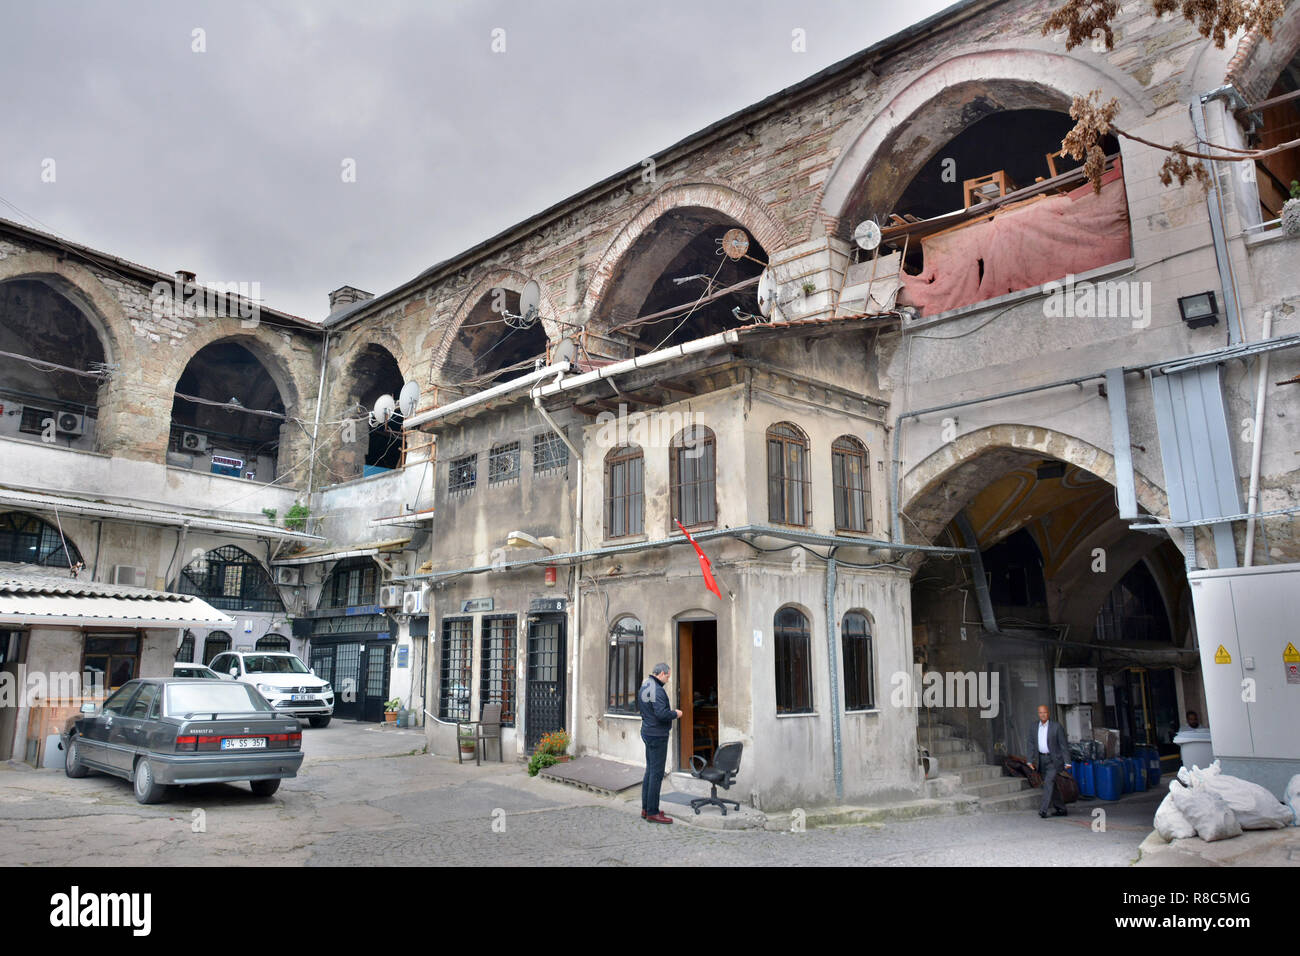 Istanbul, Turkey - November 6, 2015. Courtyard of Vezir han in Istanbul, with people and cars. This caravanserai was built between 1659 and 1660. Stock Photo